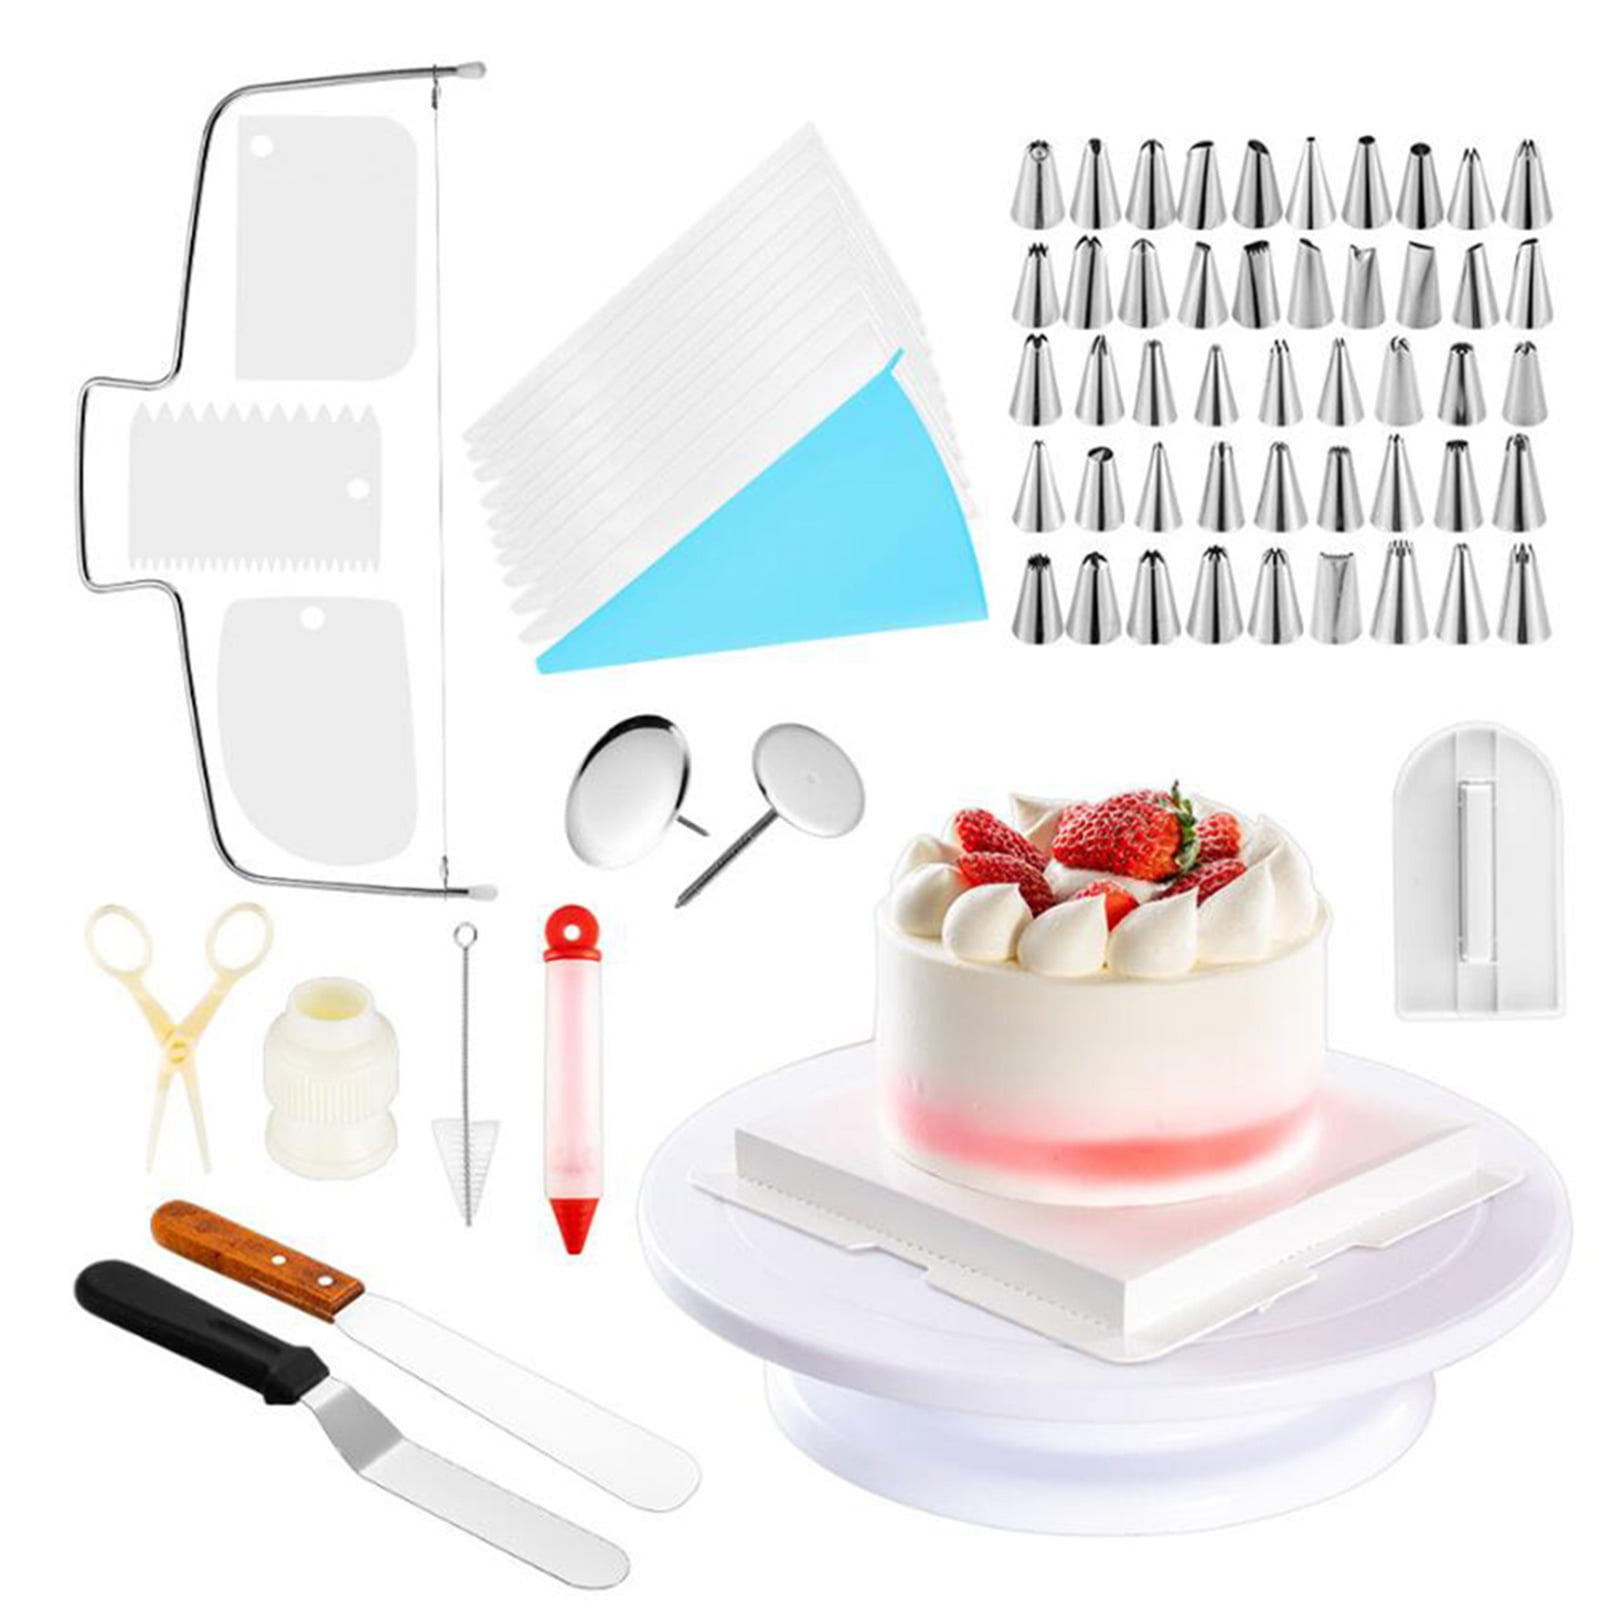 106/164x Cake Decorating Kit Turntable Rotating Baking Flower Icing Piping Nozzl 